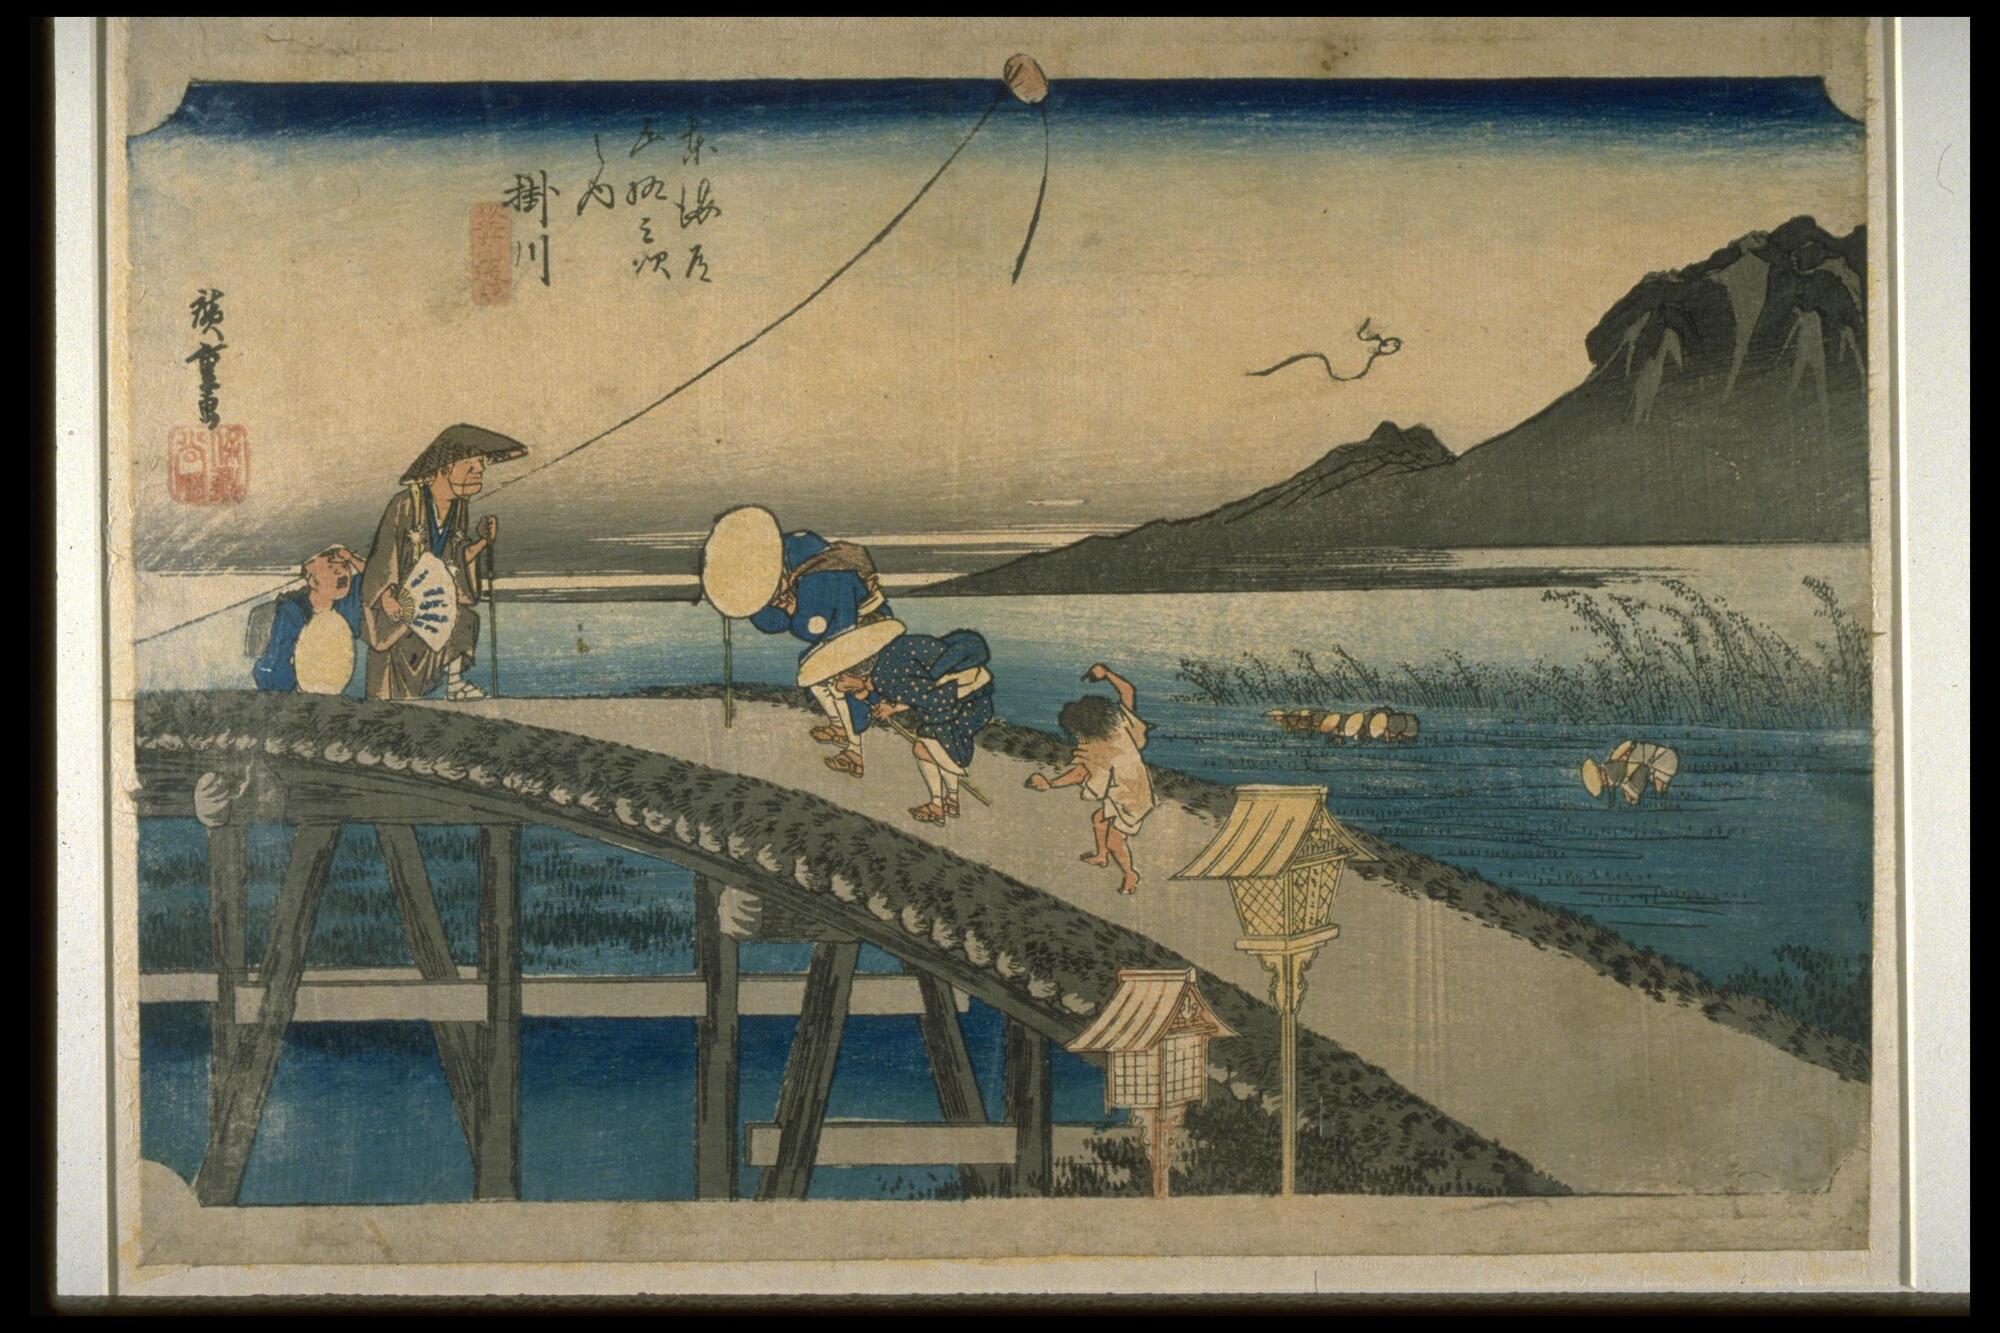 A bridge forms a diagonal on the print. Three travellers are passing the bridge, while two monks are walking down toward them. Landscape of water and mountains is shown in the background.